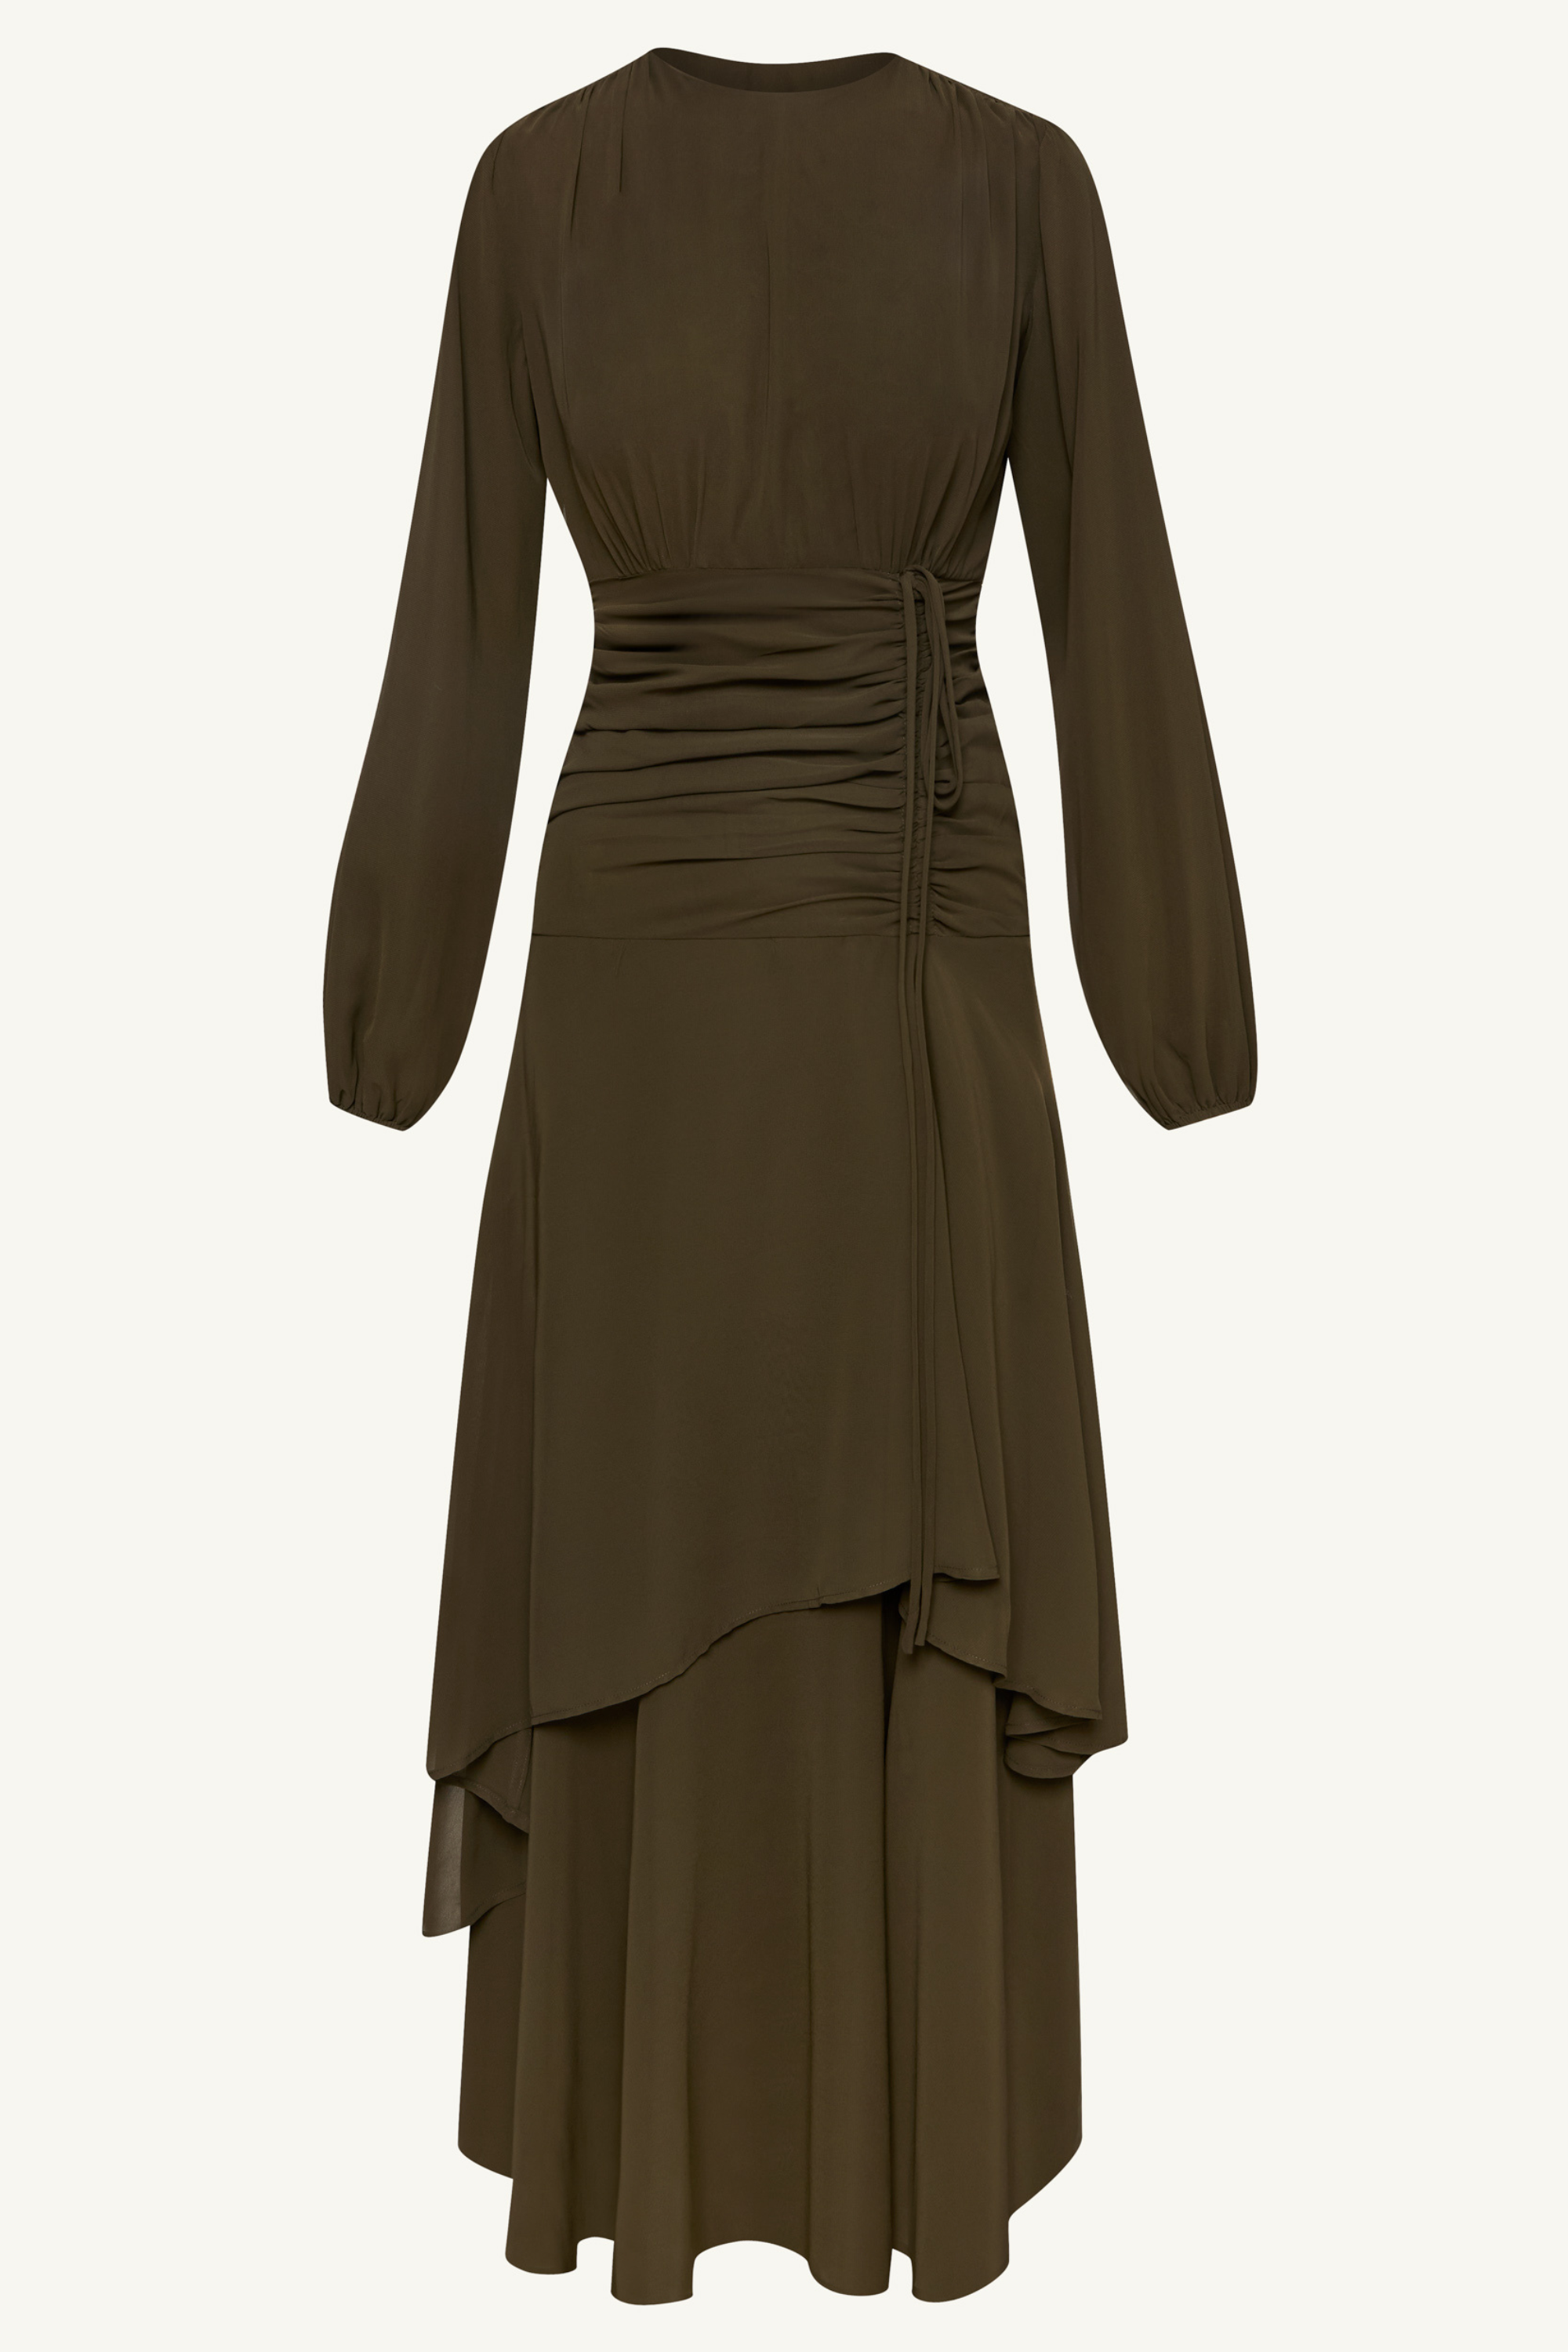 Narjis Side Rouched Maxi Dress - Olive